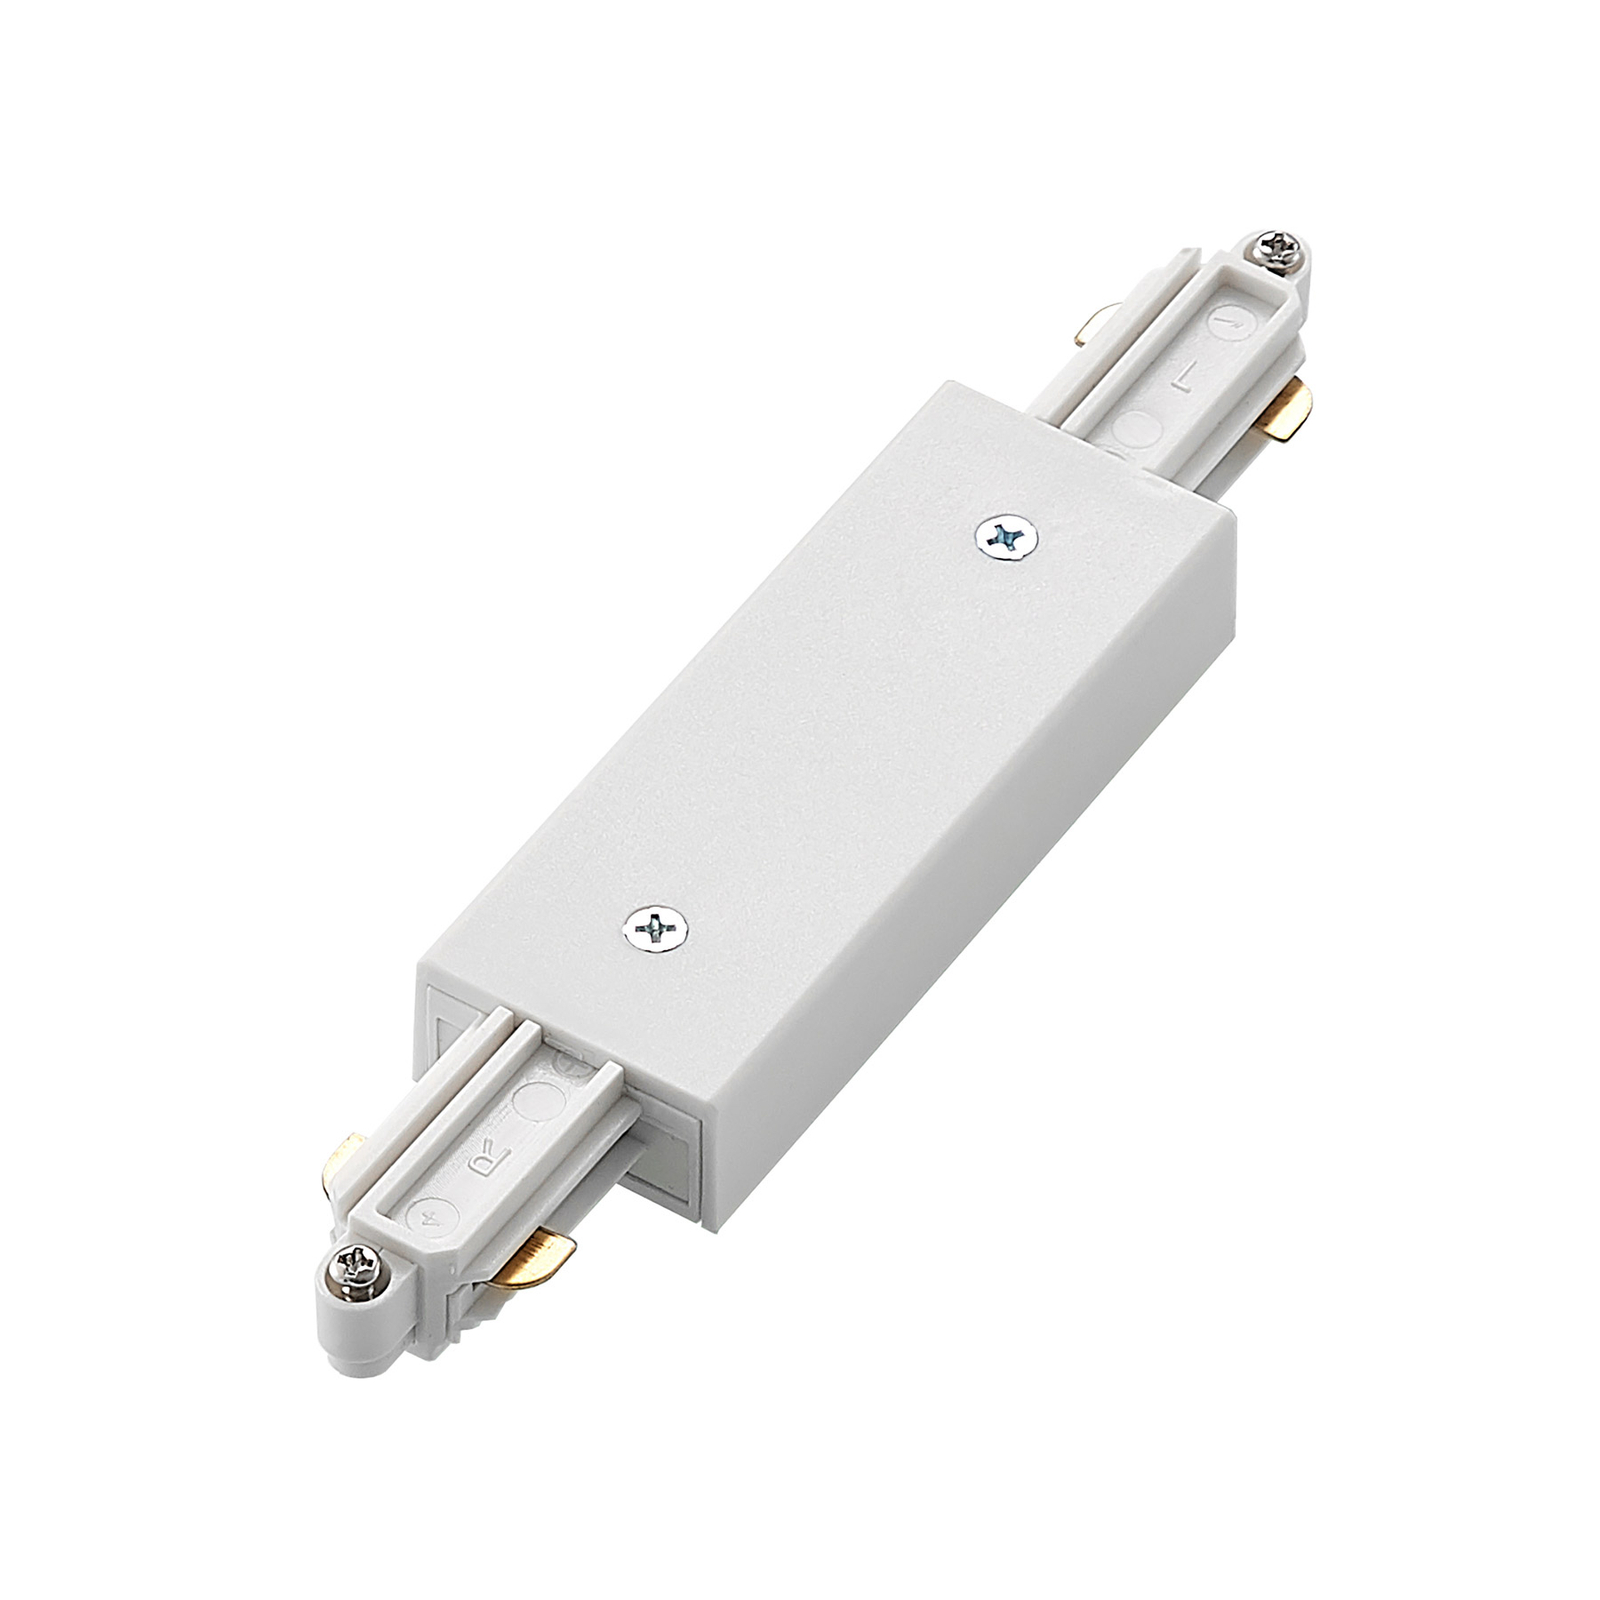 Lindby central power feed Linaro, white, single-circuit track lighting